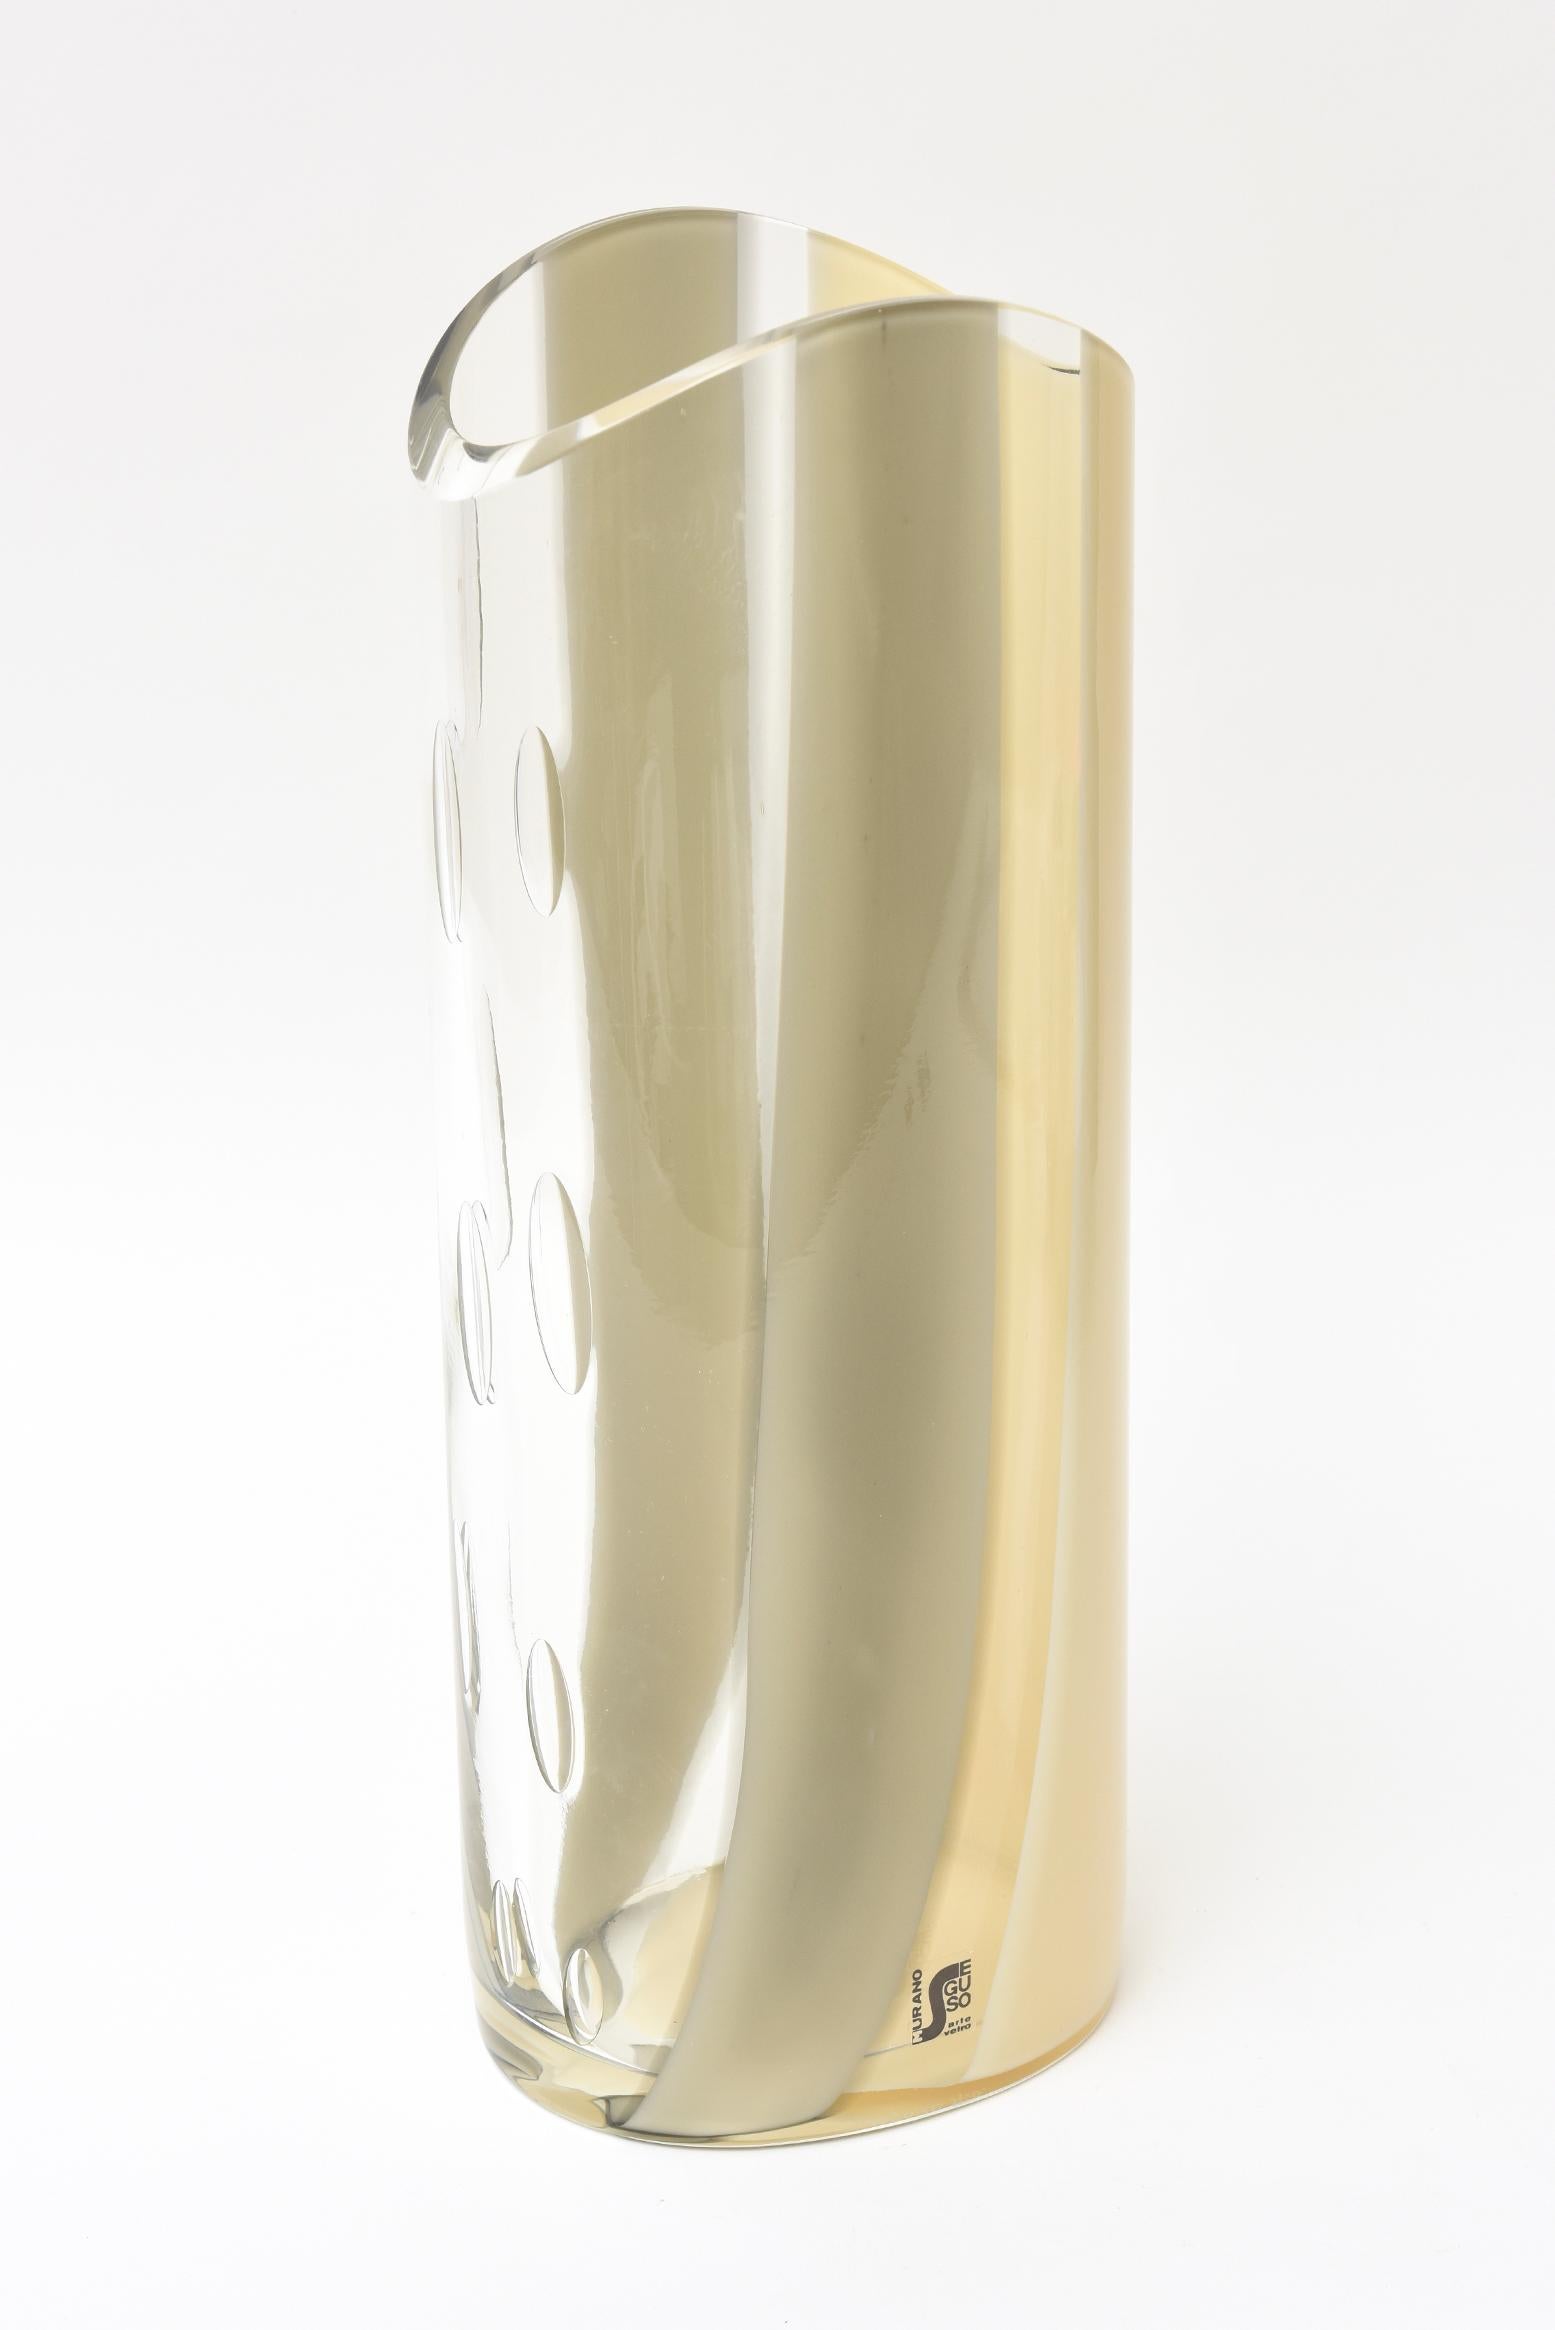 This Italian Murano signed Seguso vase is from the 1980s. The palette of cream to tan that goes to gray sweeping large stripes goes to a clear background with 10 assorted teardrop bubbles cascading the other side. The original plastic sticker